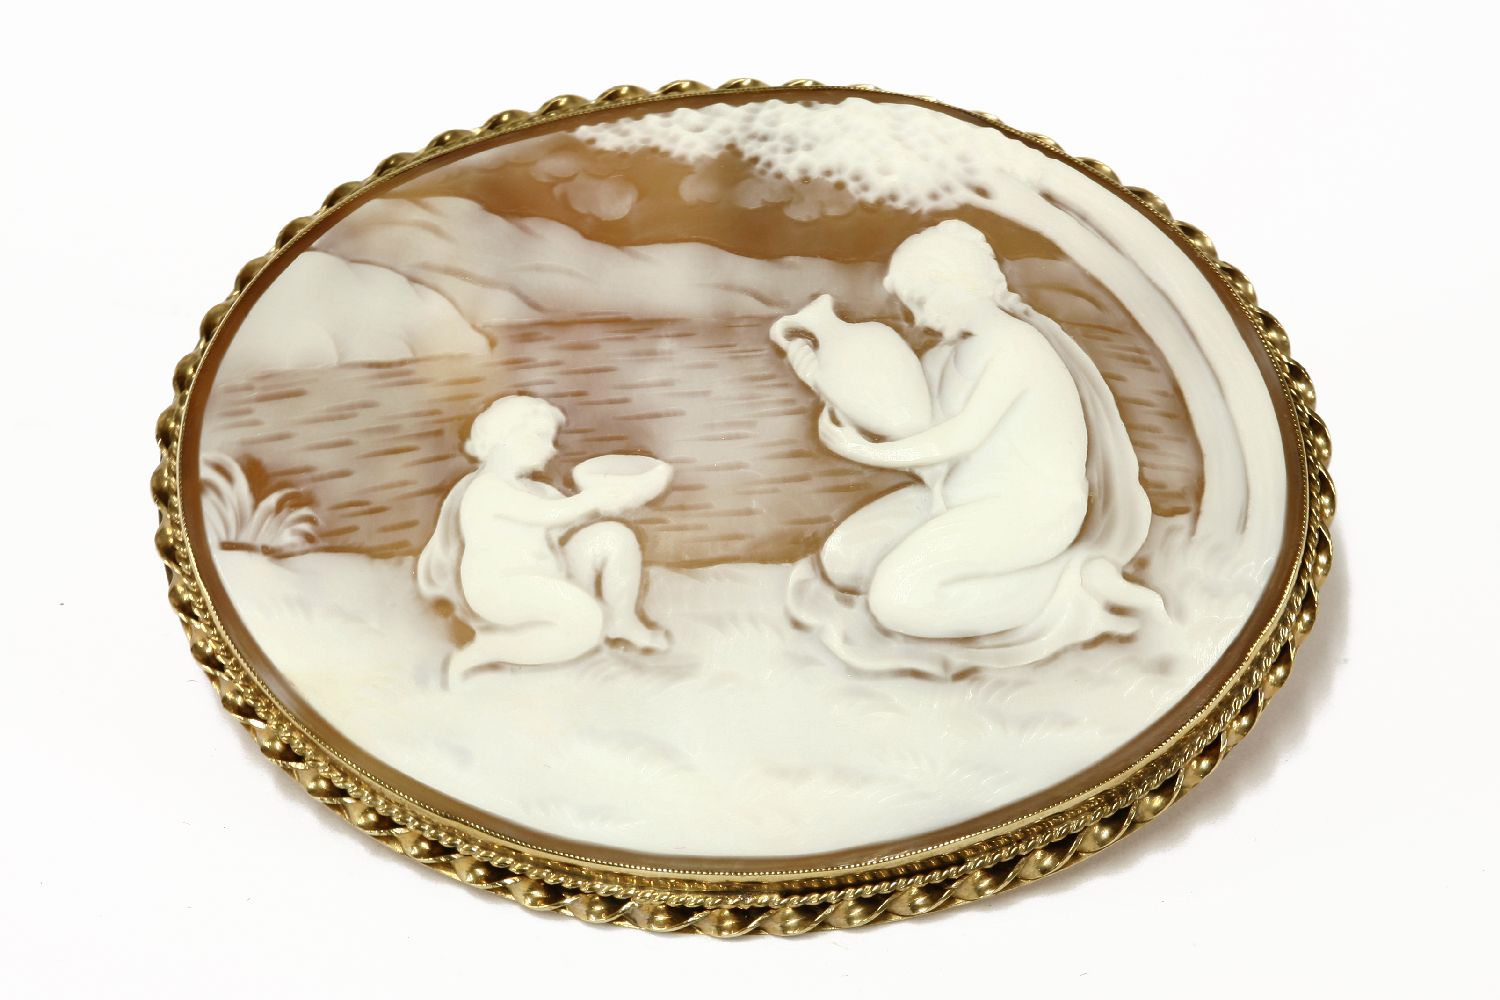 A 9ct gold mounted shell cameo brooch of a young maiden in a landscape setting